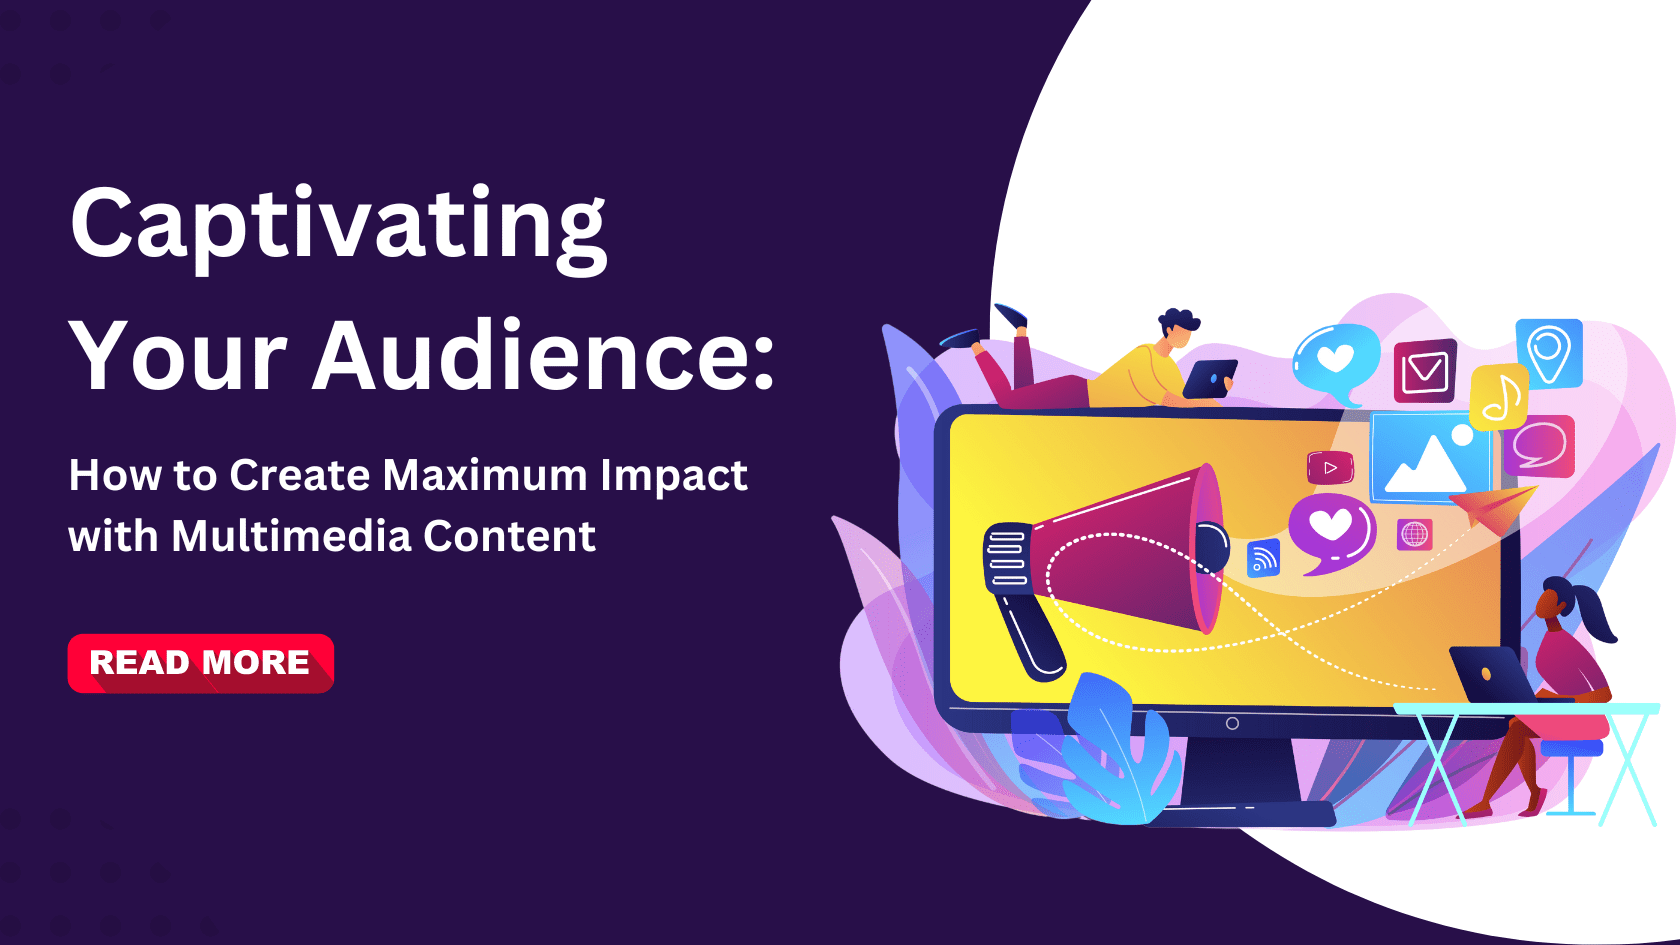 Captivating Your Audience: How to Create Maximum Impact with Multimedia Content